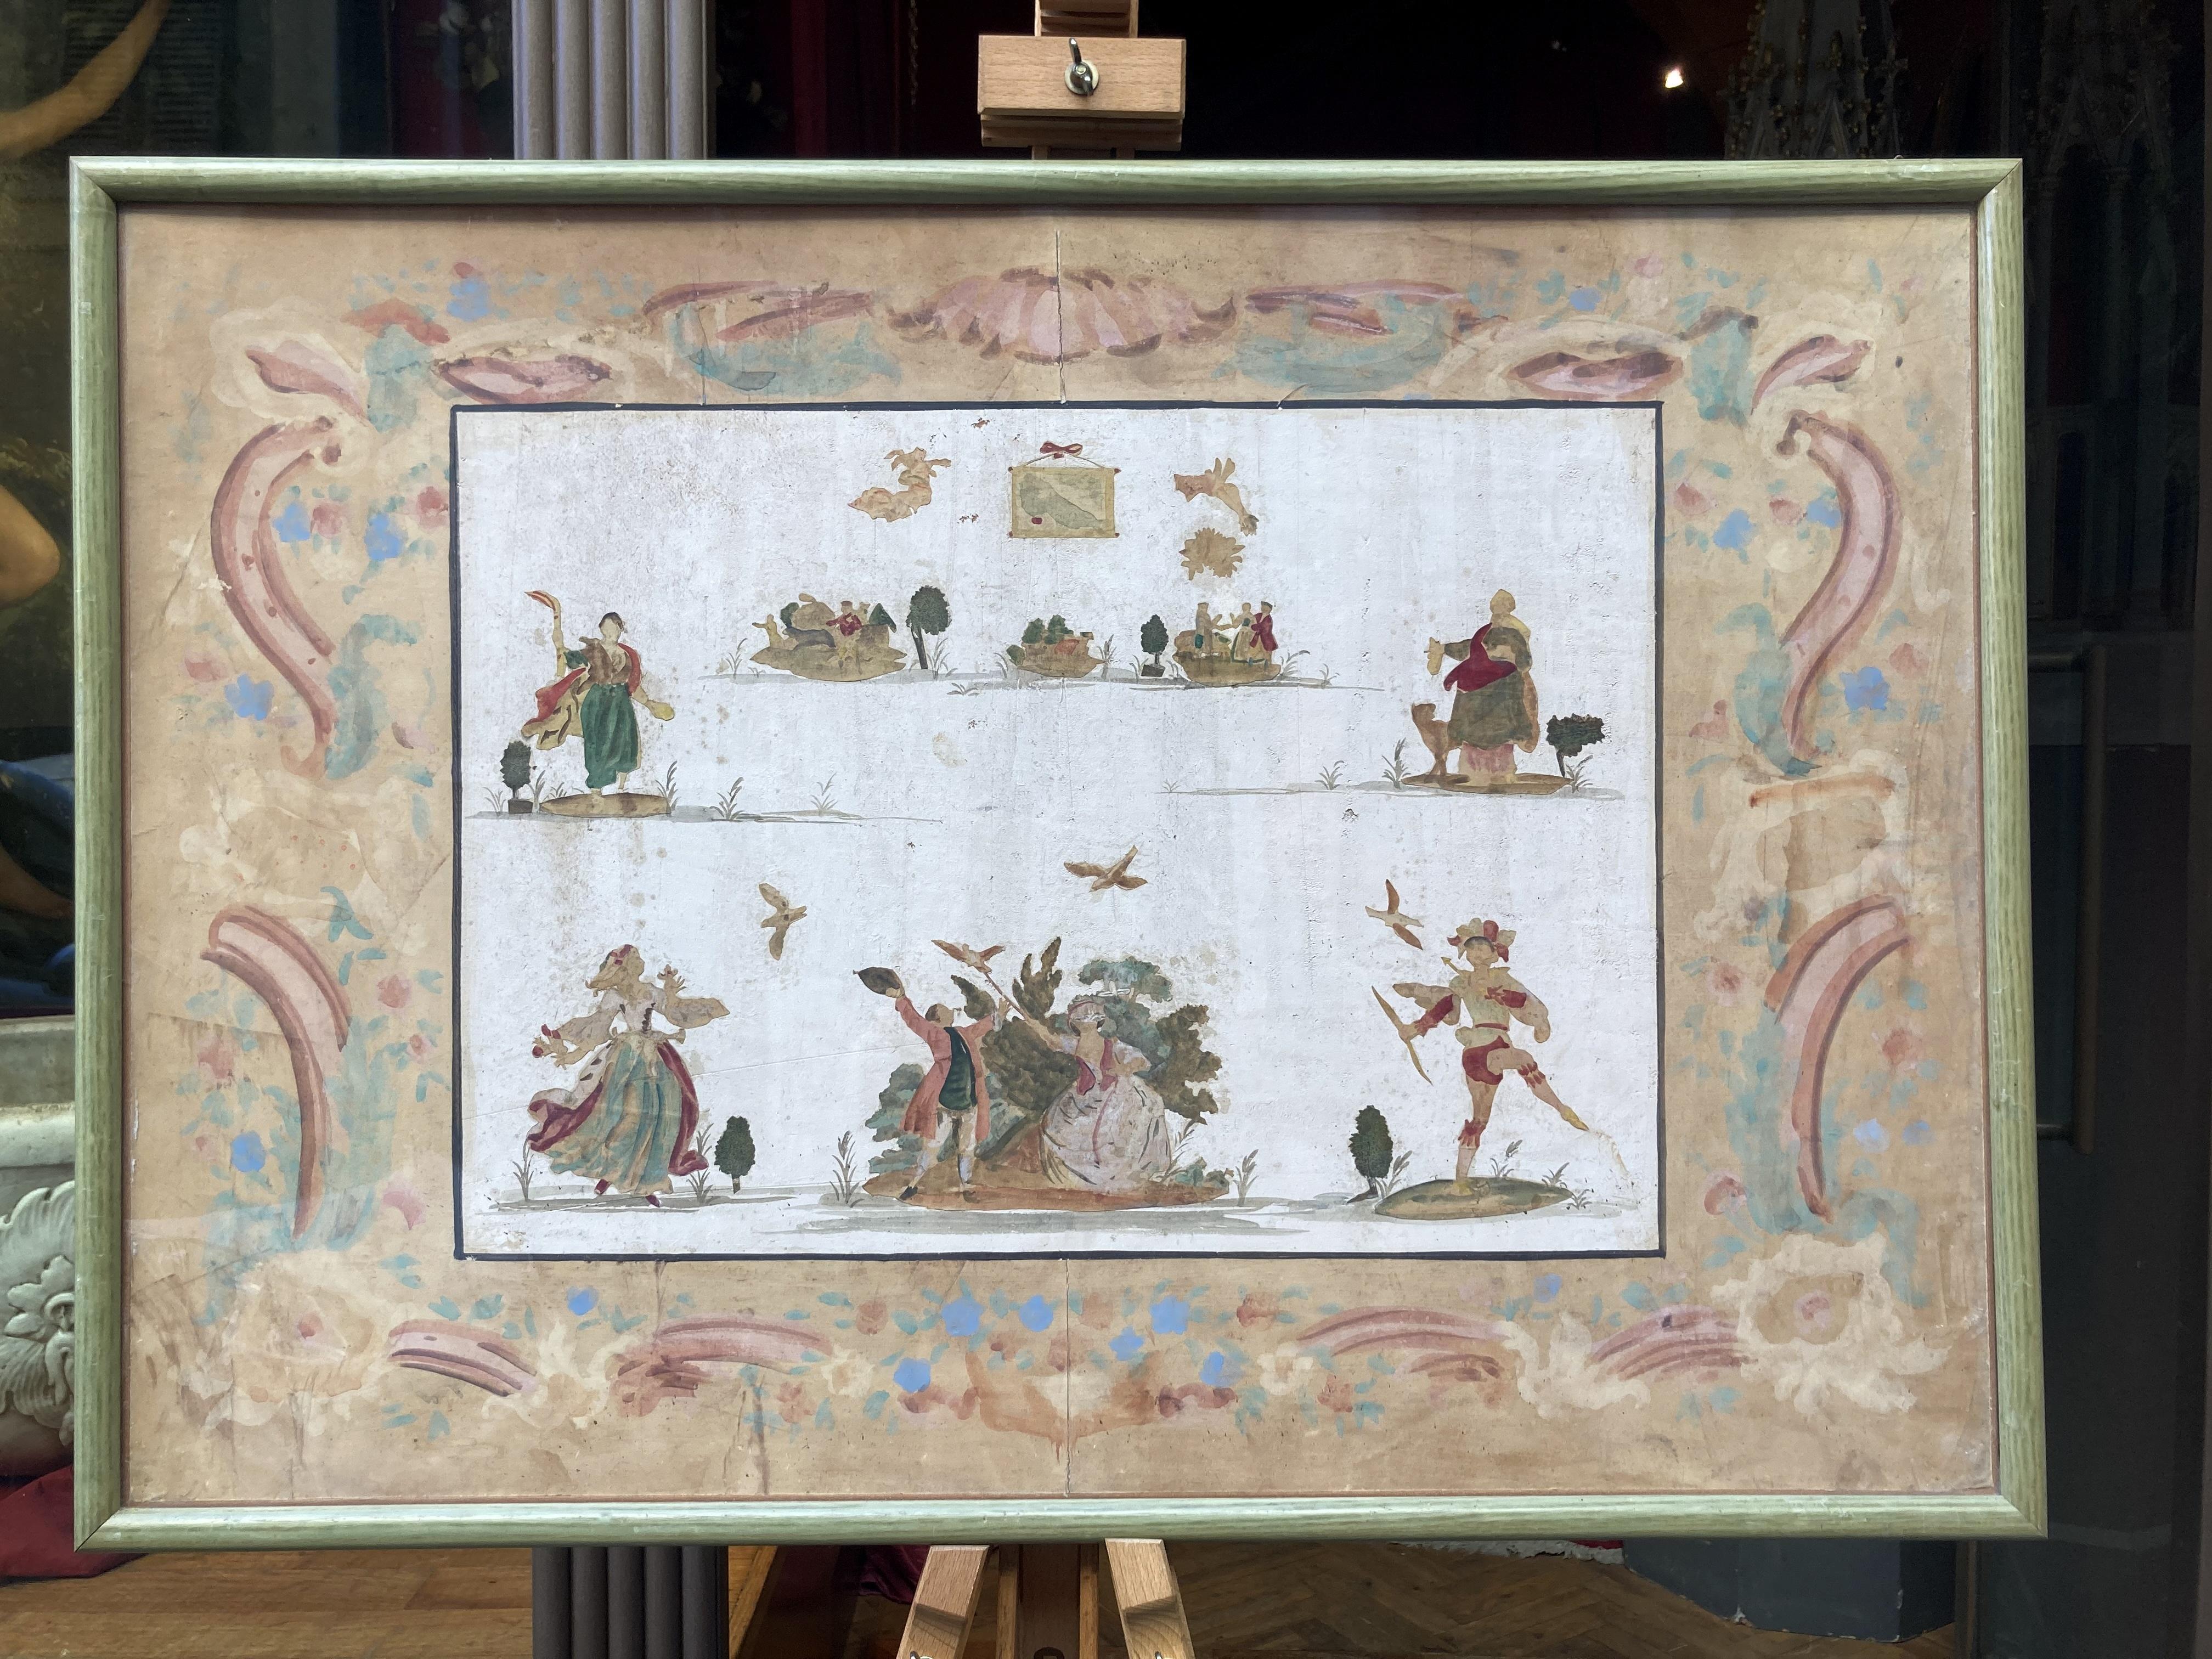 This set of four antique 19th century Italian mixed media painting on paper hand made with gouache, tempera and watercolor, features several characters silhouettes acting in a theater play.
These fine artworks are very unusual, they probably were